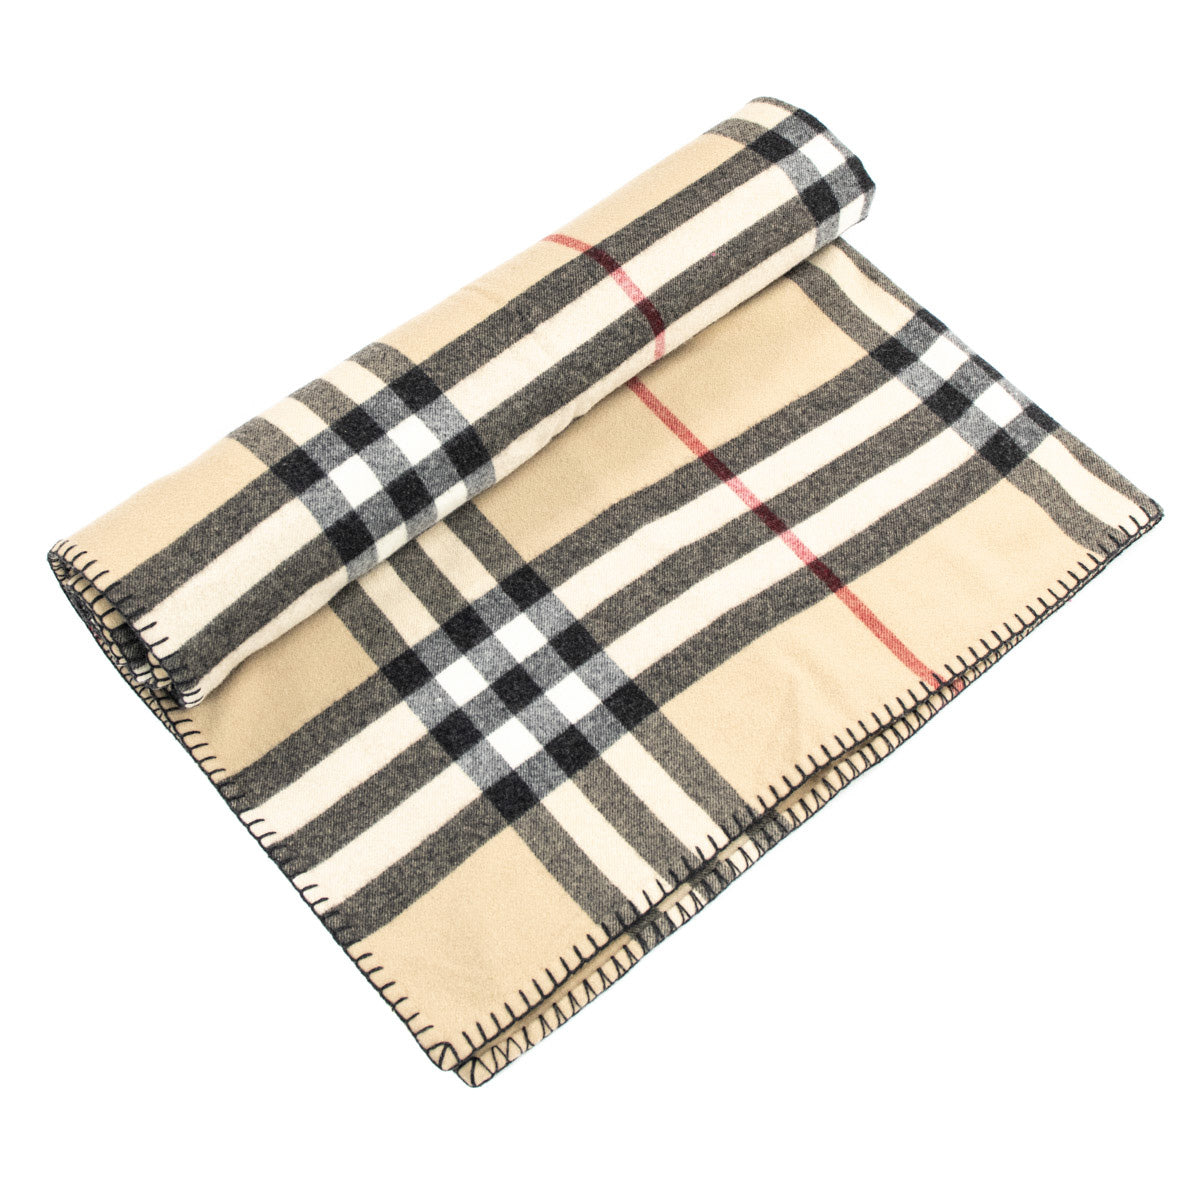 Burberry Nova Check Lambswool Large Blanket - Love that Bag etc - Preowned Authentic Designer Handbags & Preloved Fashions